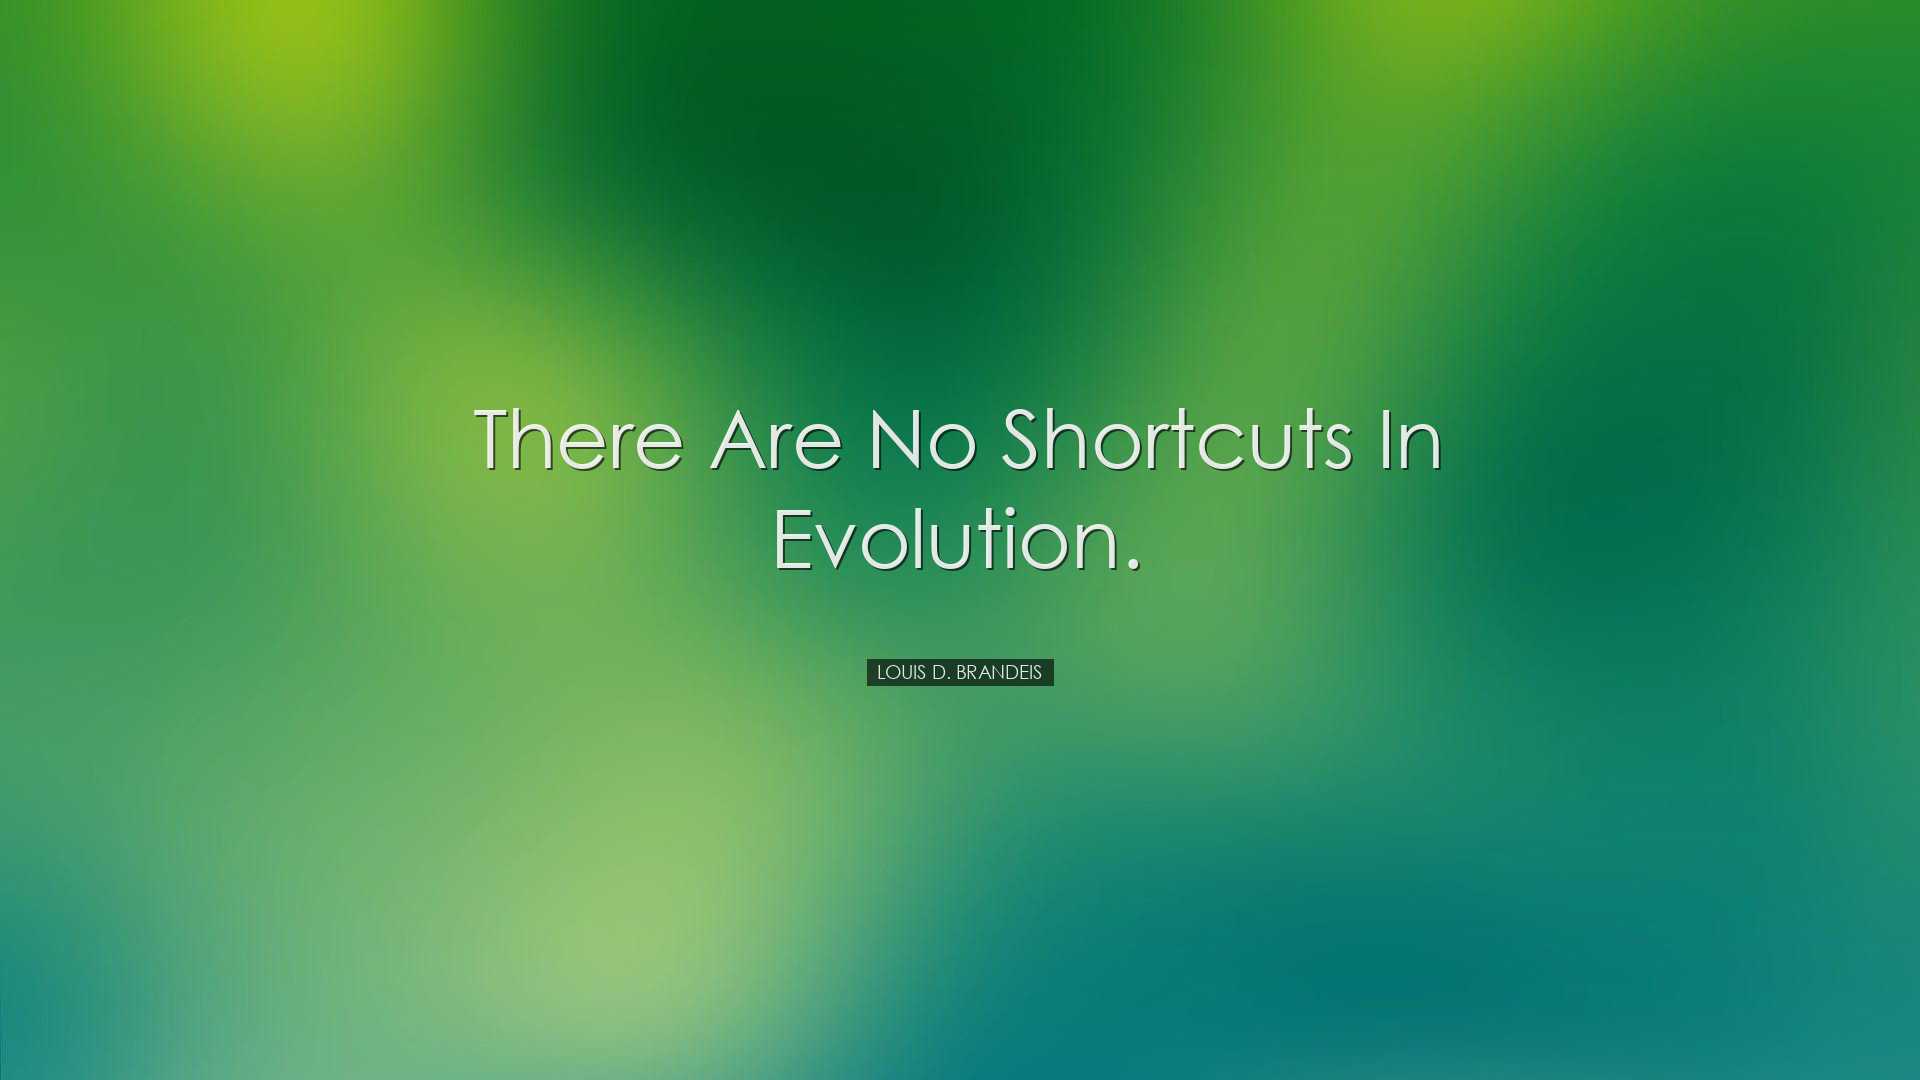 There are no shortcuts in evolution. - Louis D. Brandeis